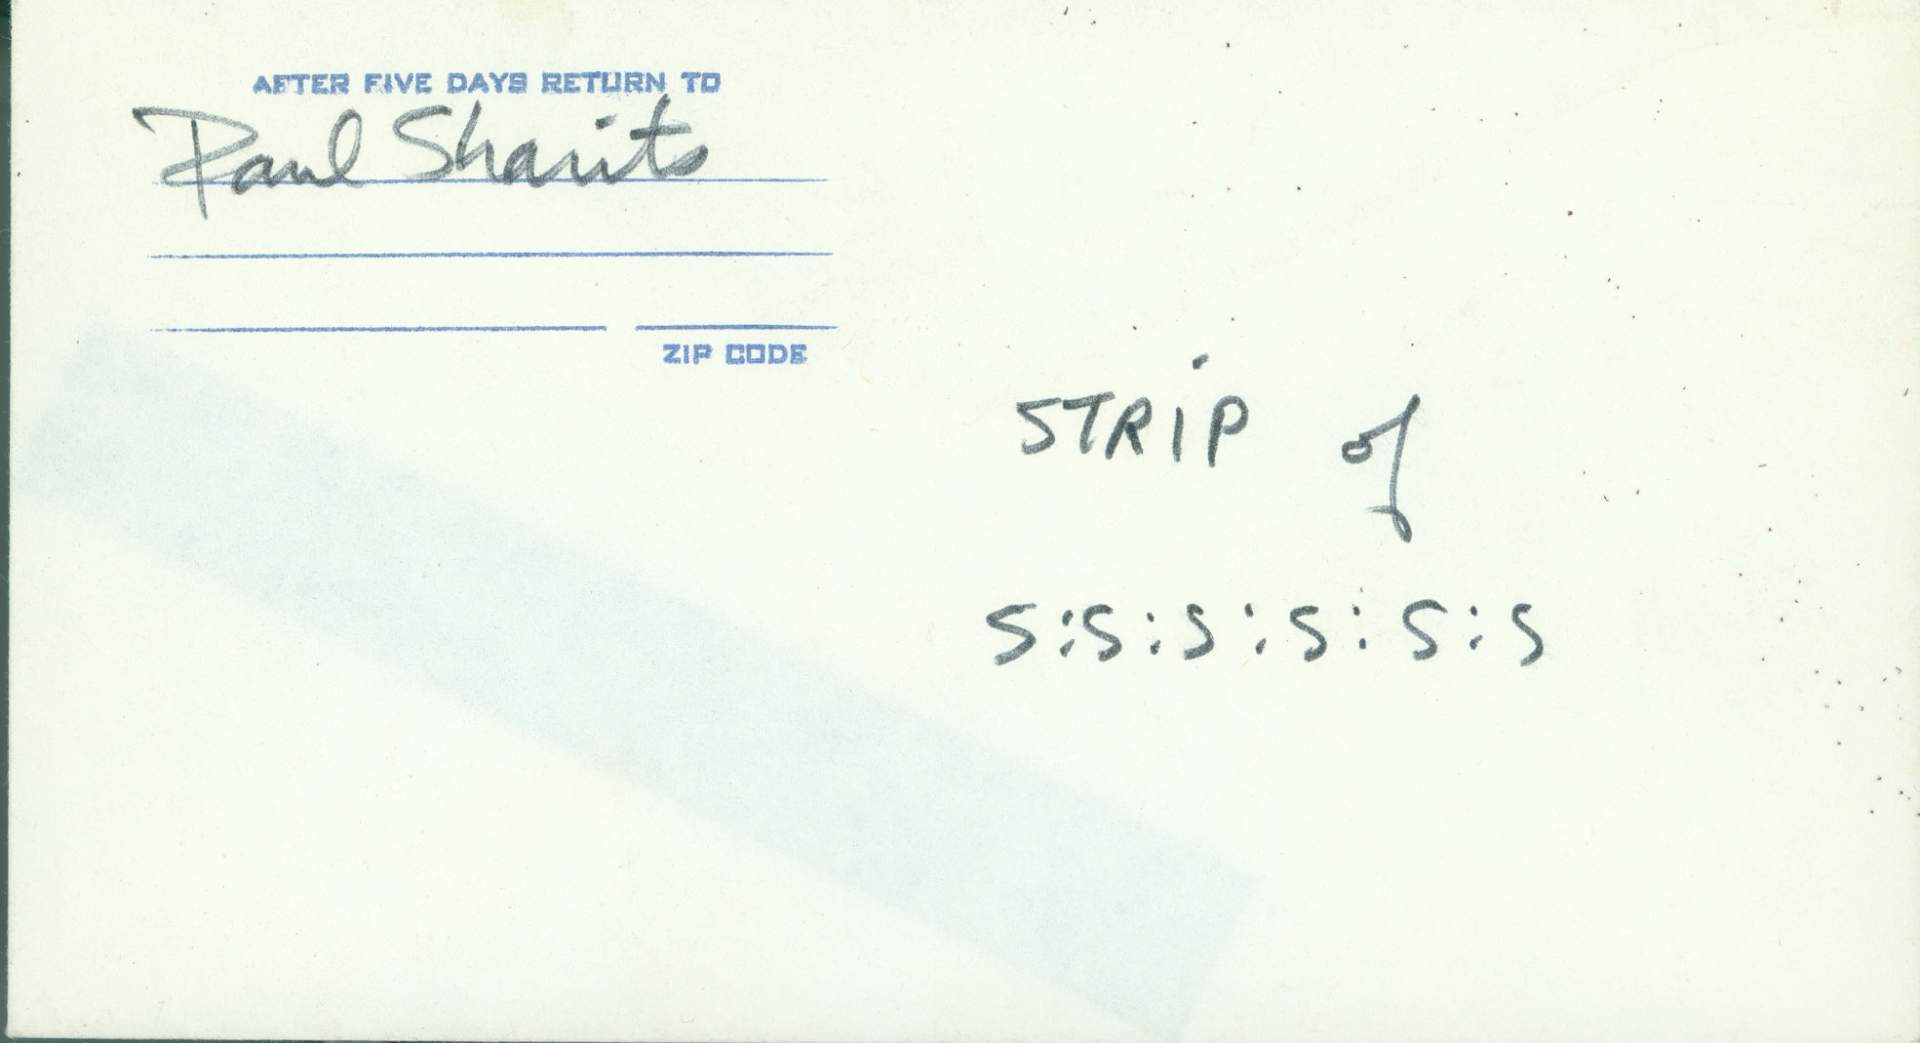 Untitled (Strip of S:S:S:S:S:S envelope)